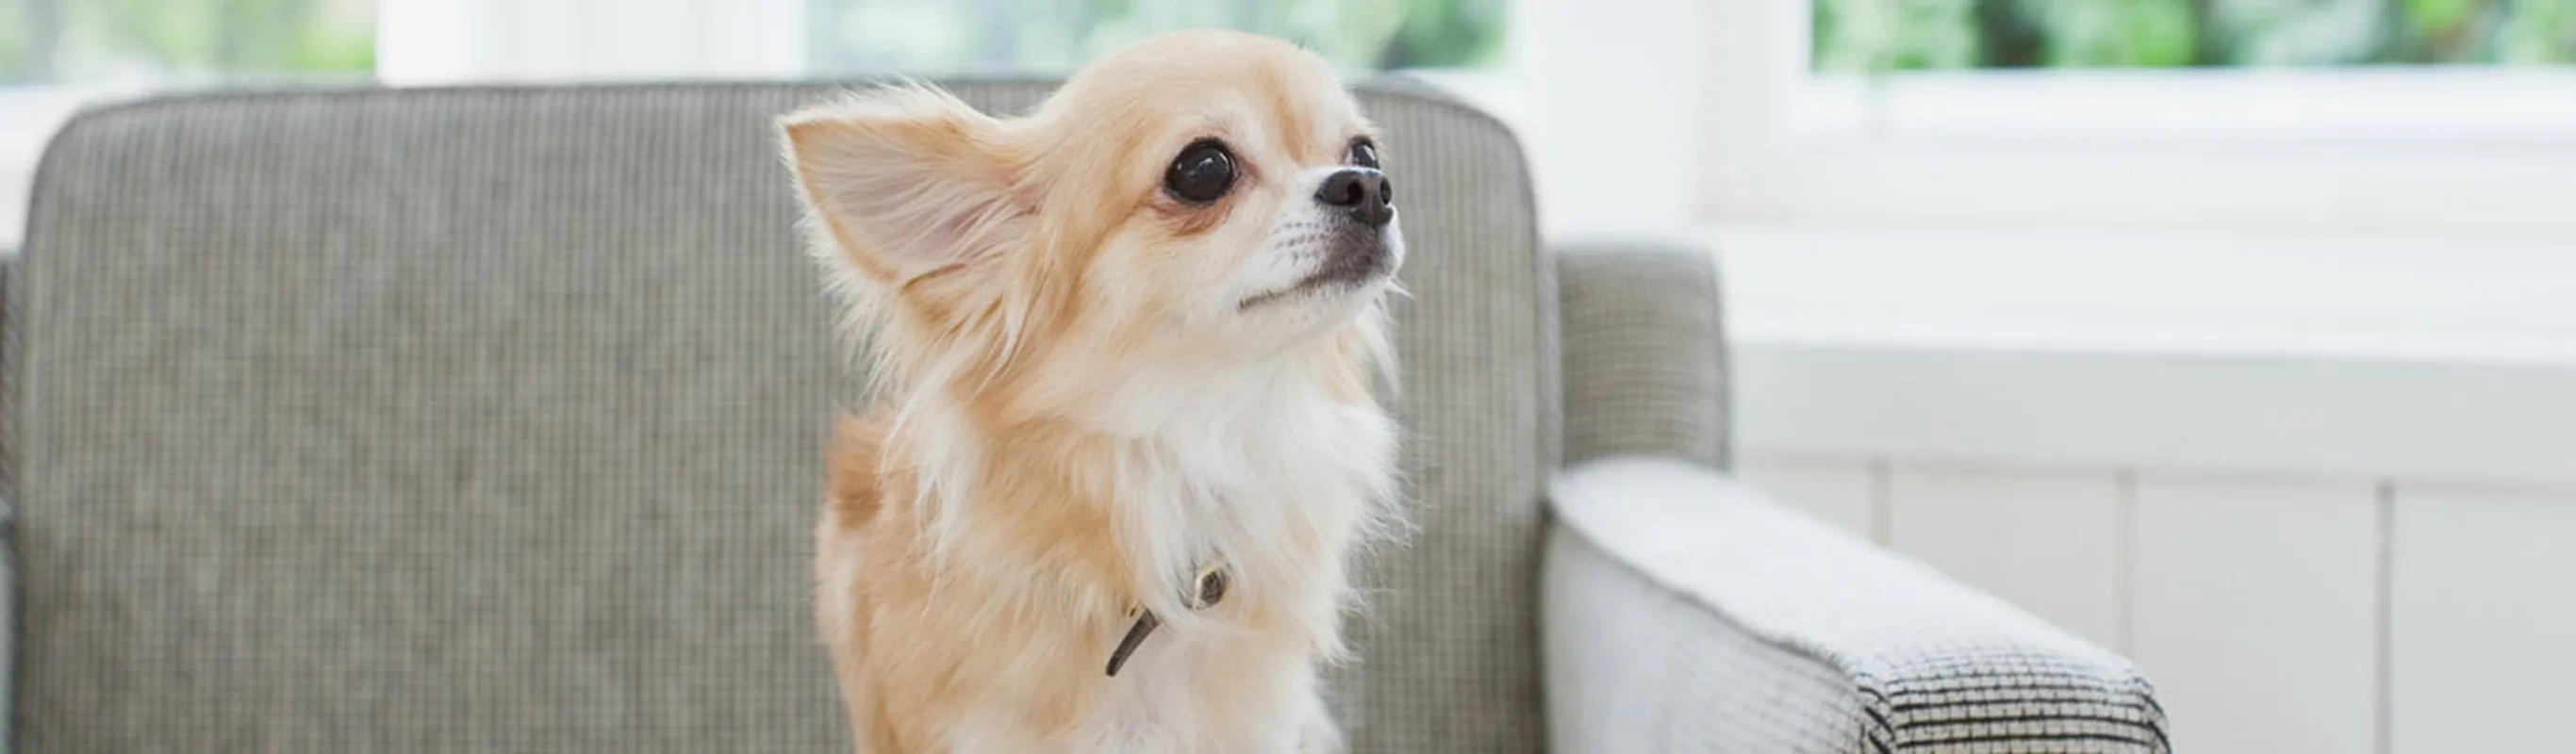 Small long haired Chihuahua standing on couch